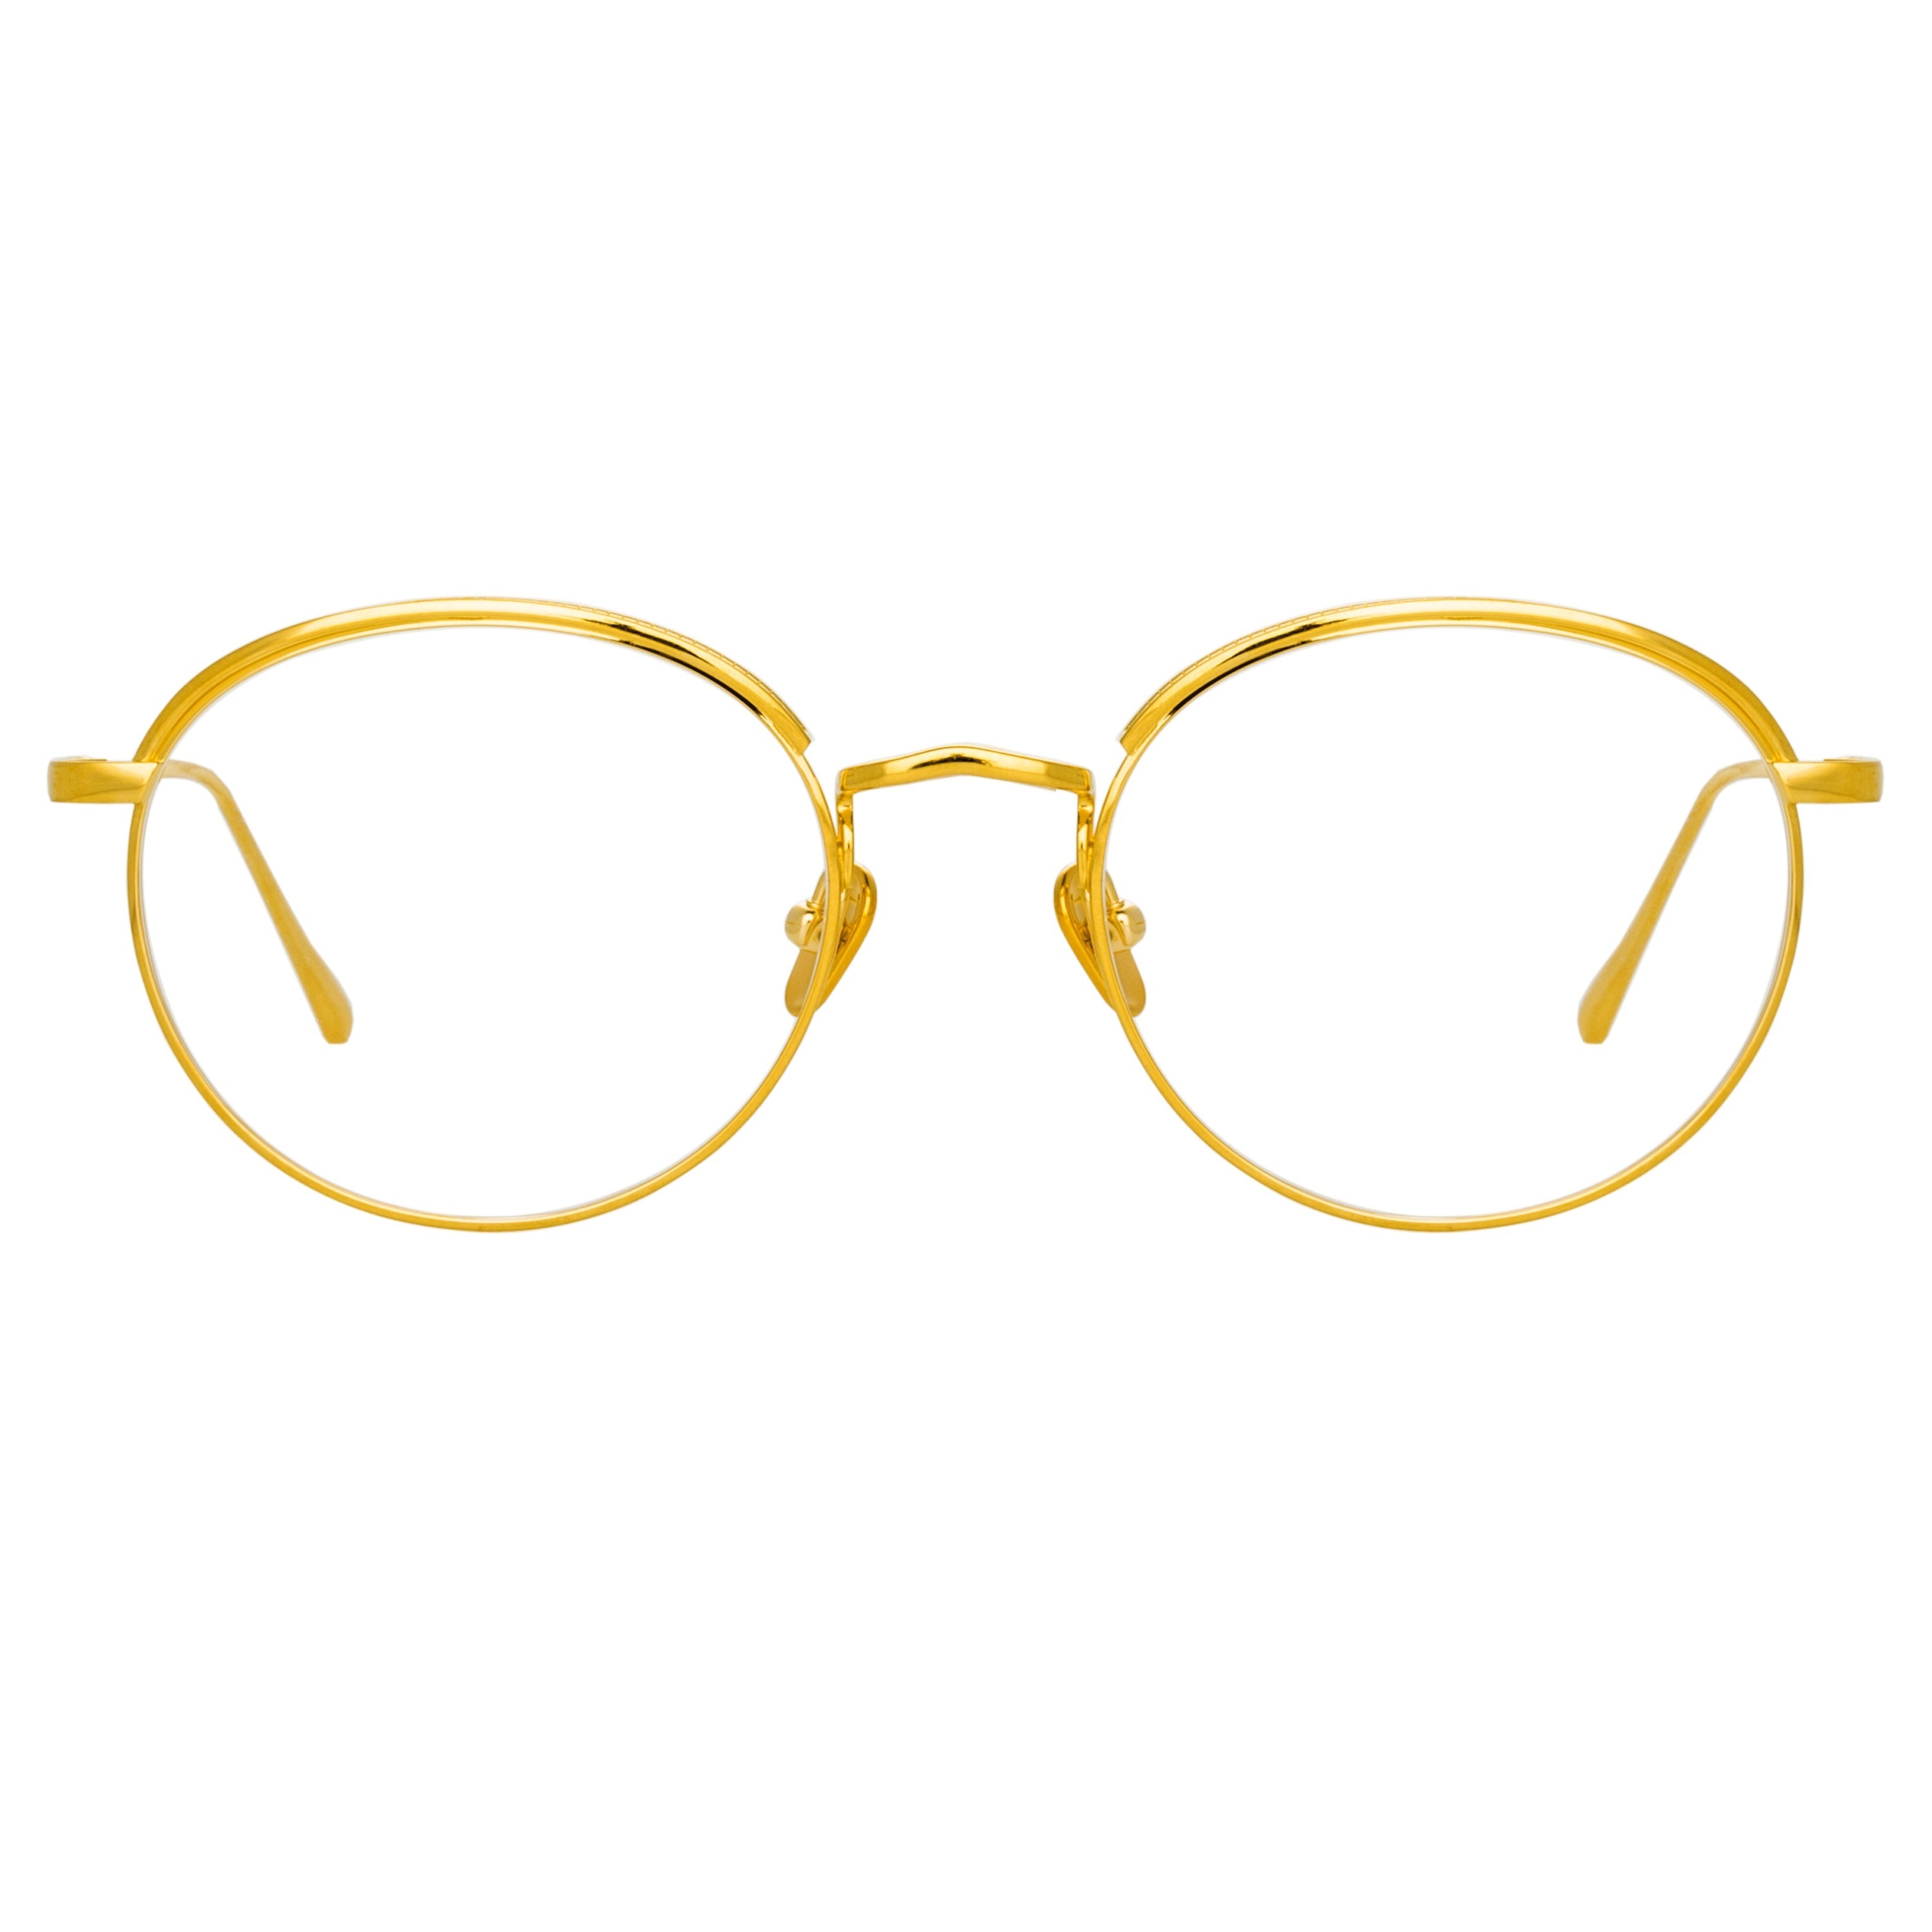 THE MARLON | OVAL OPTICAL FRAME IN YELLOW GOLD (C5) - 1